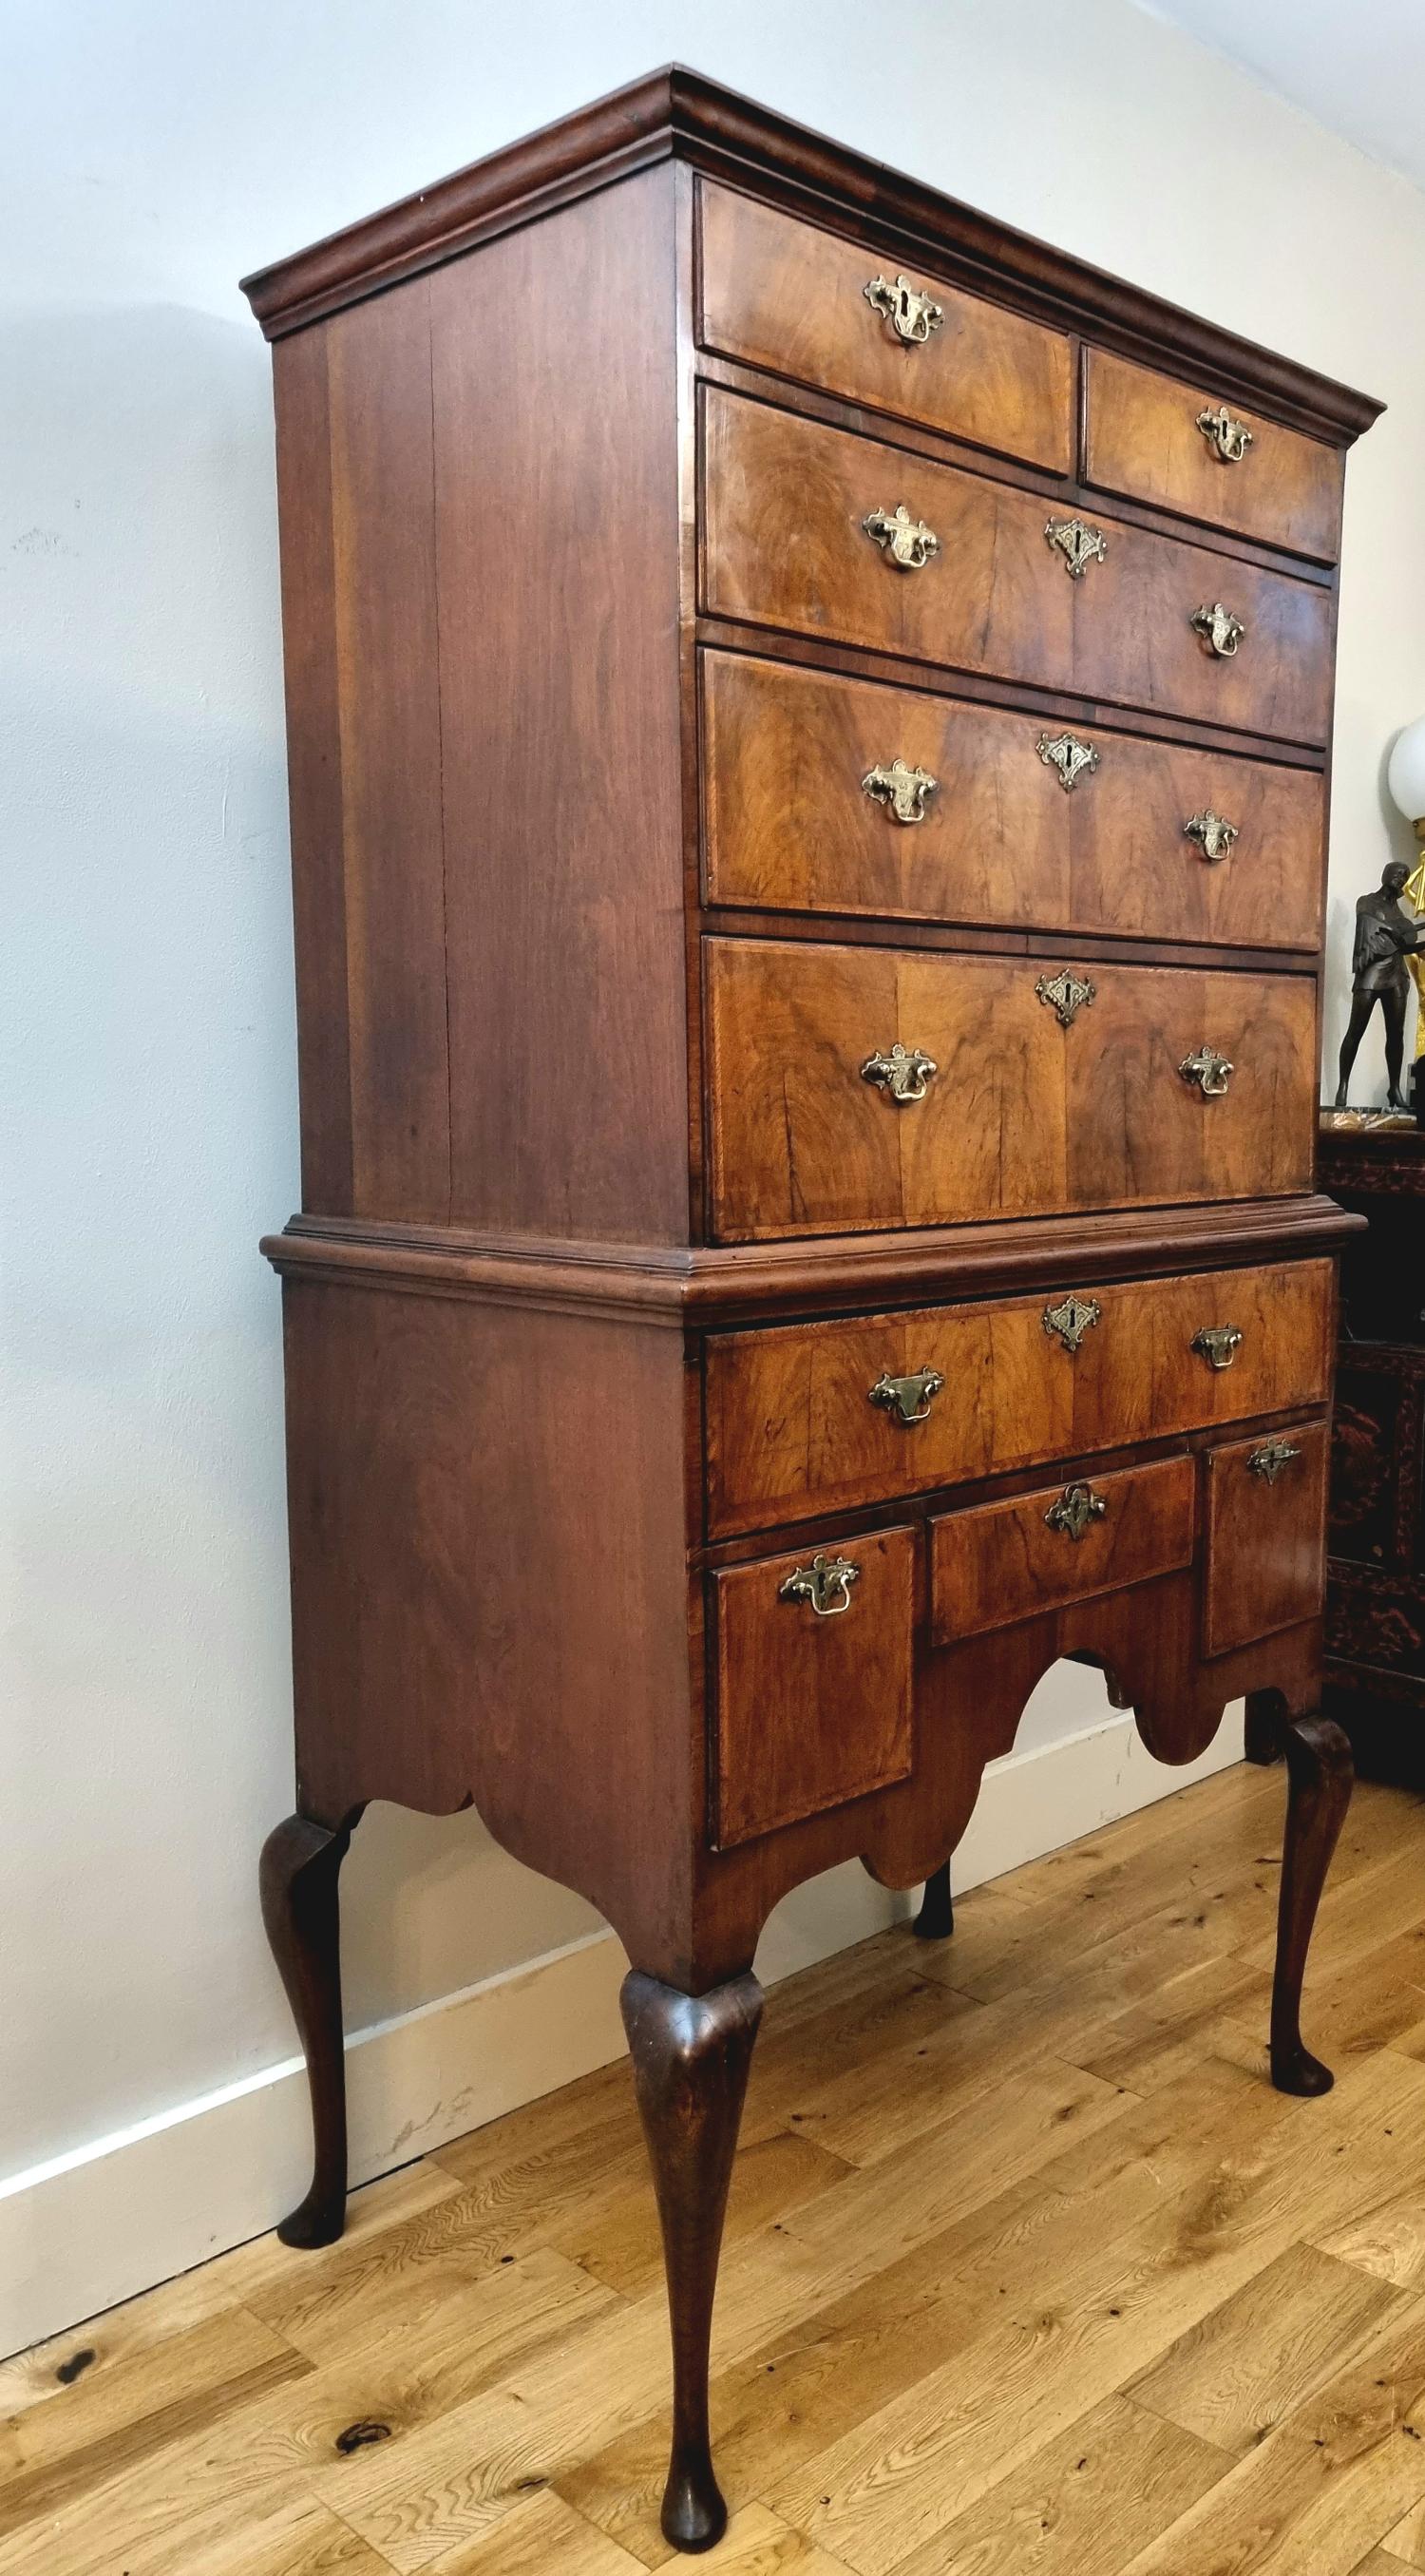 An exceptional early 18th Century Queen Anne period Walnut Chest On Stand / Highboy , dating to 1702-14 .

Impeccable colour and patina . Beautiful figured walnut veneers with delicate feather banding to the edges of the drawers . Original chased